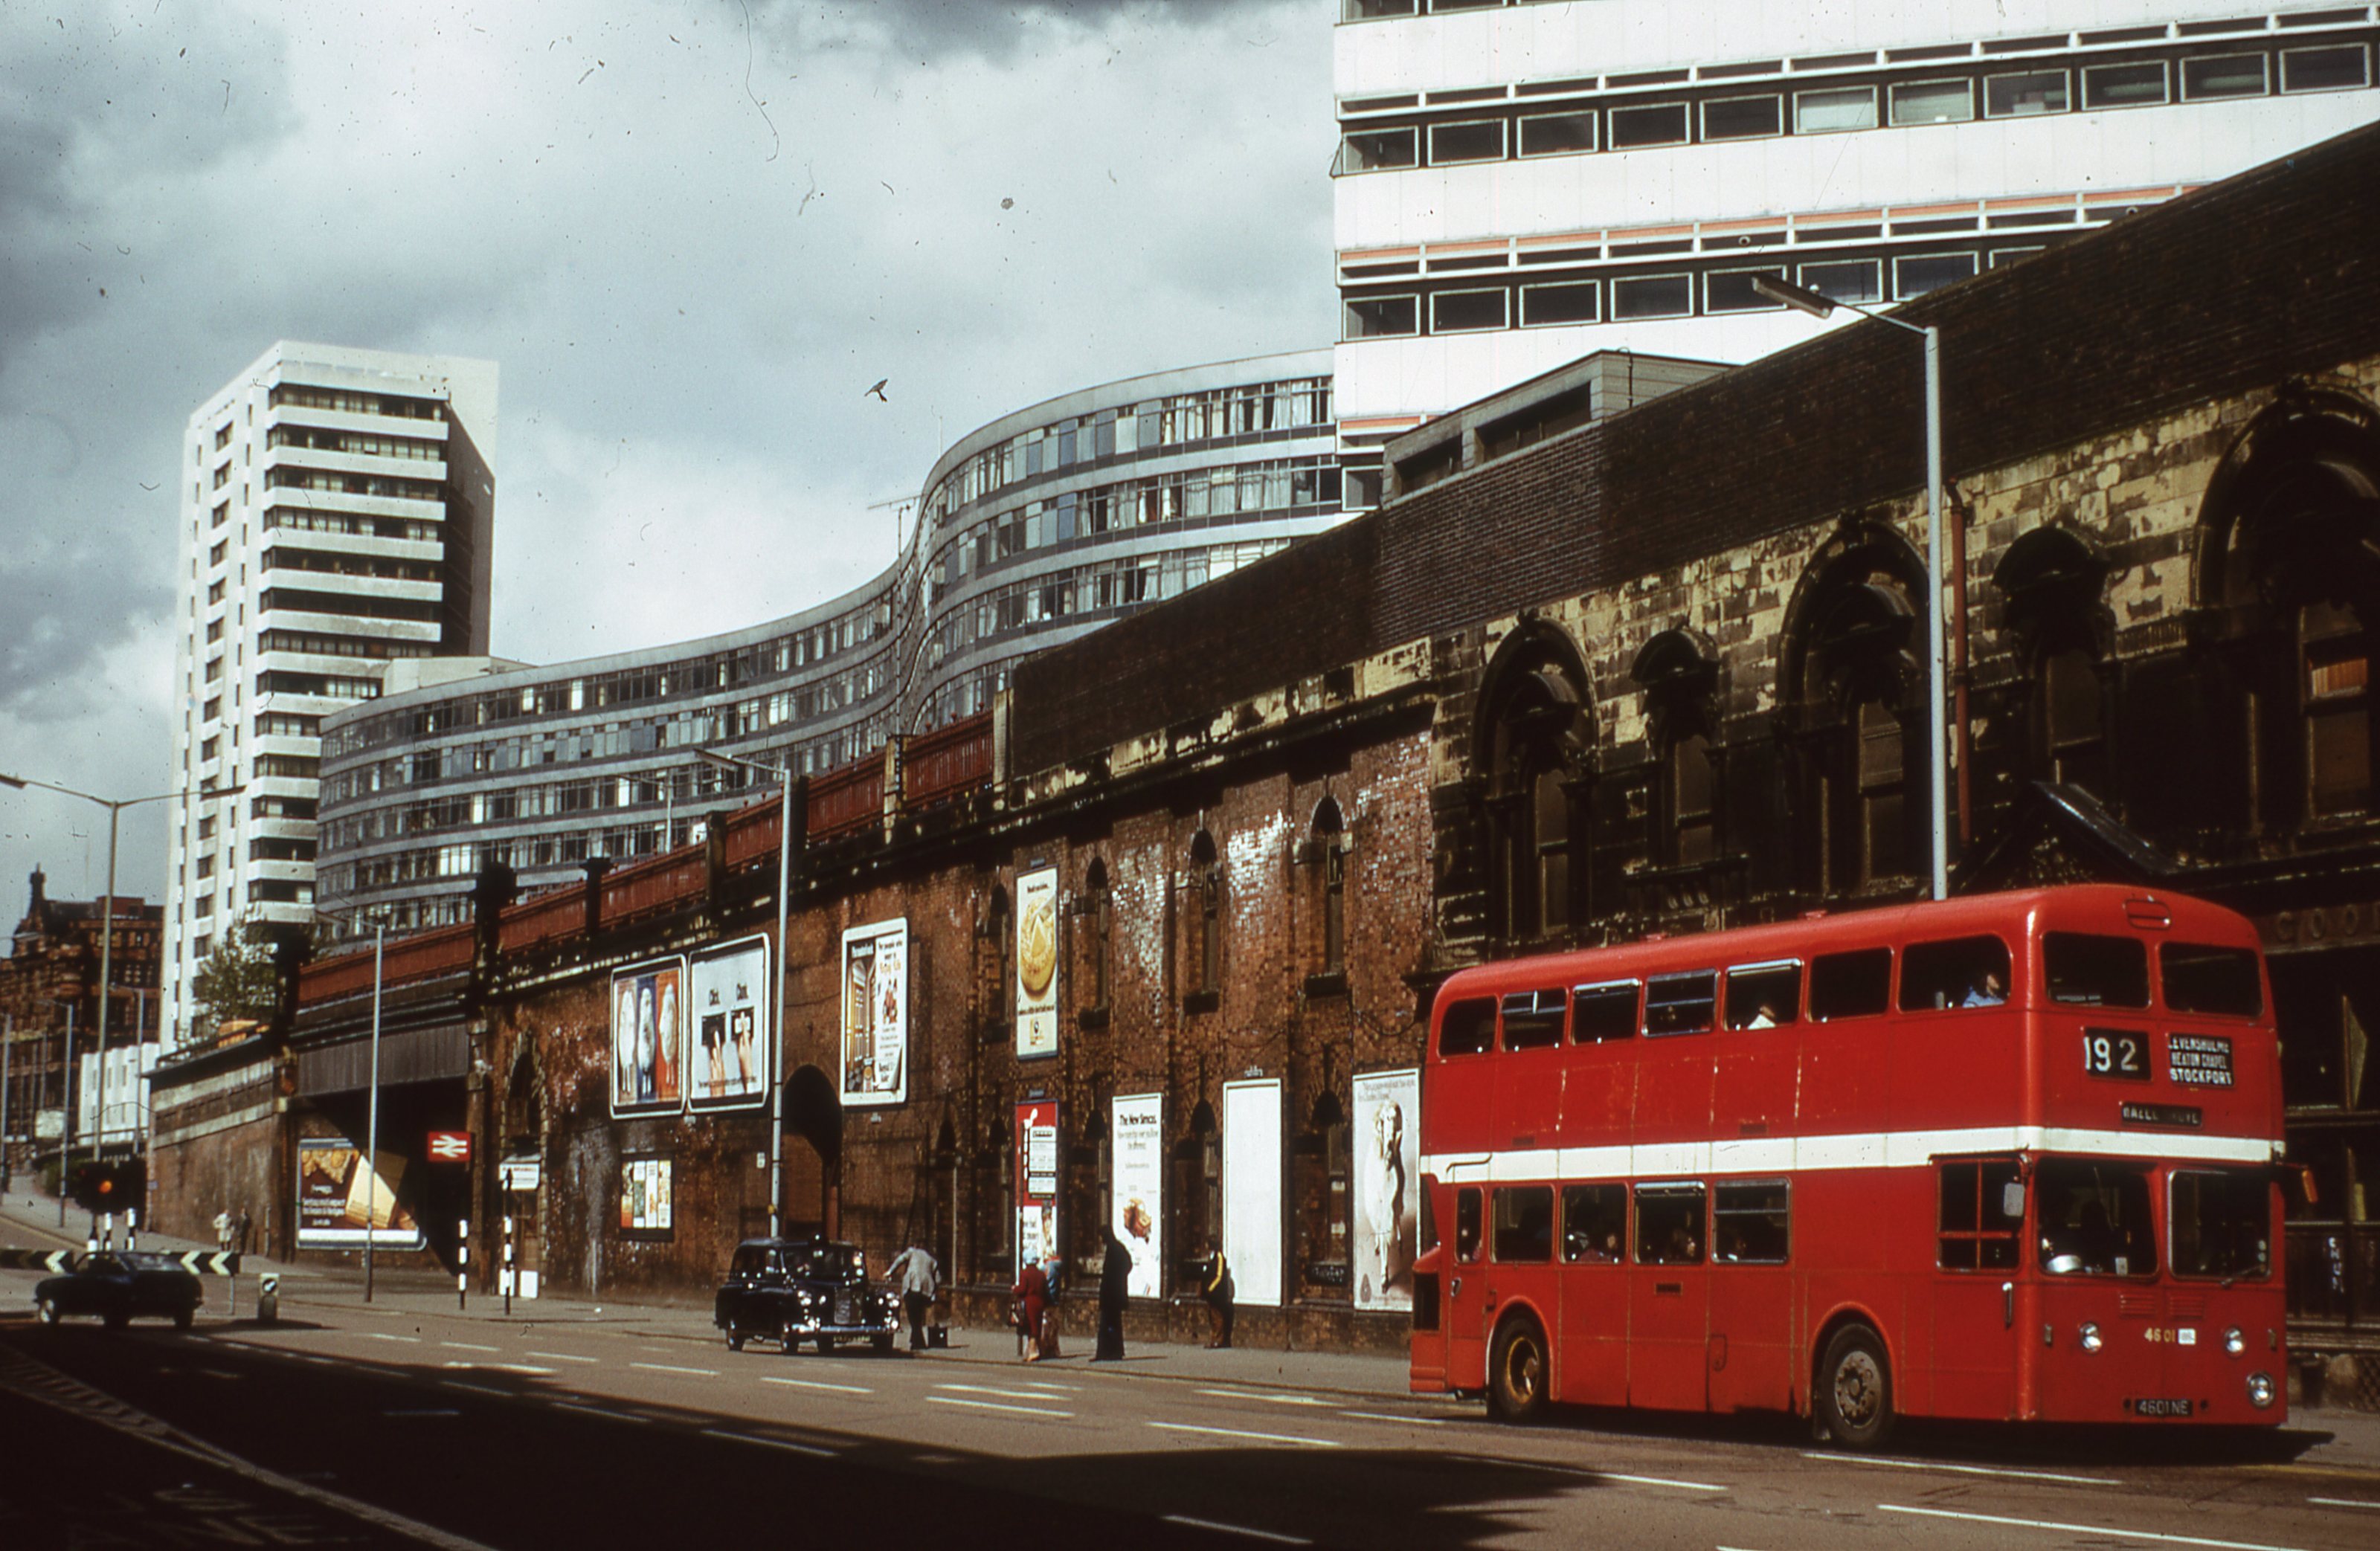 Manchester Arndale, MMU image library